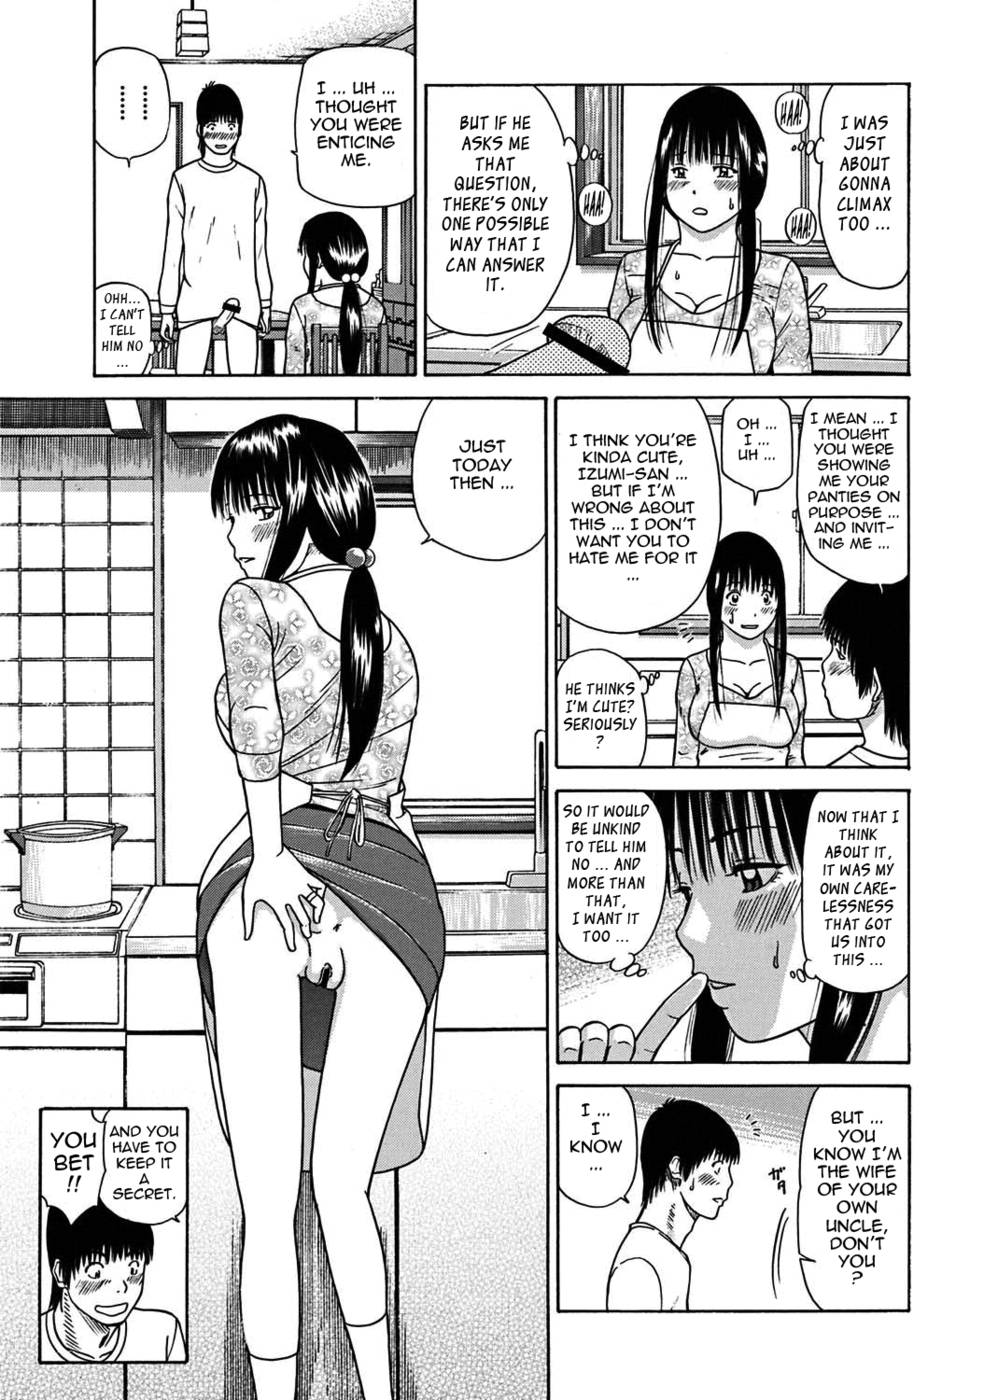 Hentai Manga Comic-33 Year Old Unsatisfied Wife-Chapter 10-Let's Just Do It-11